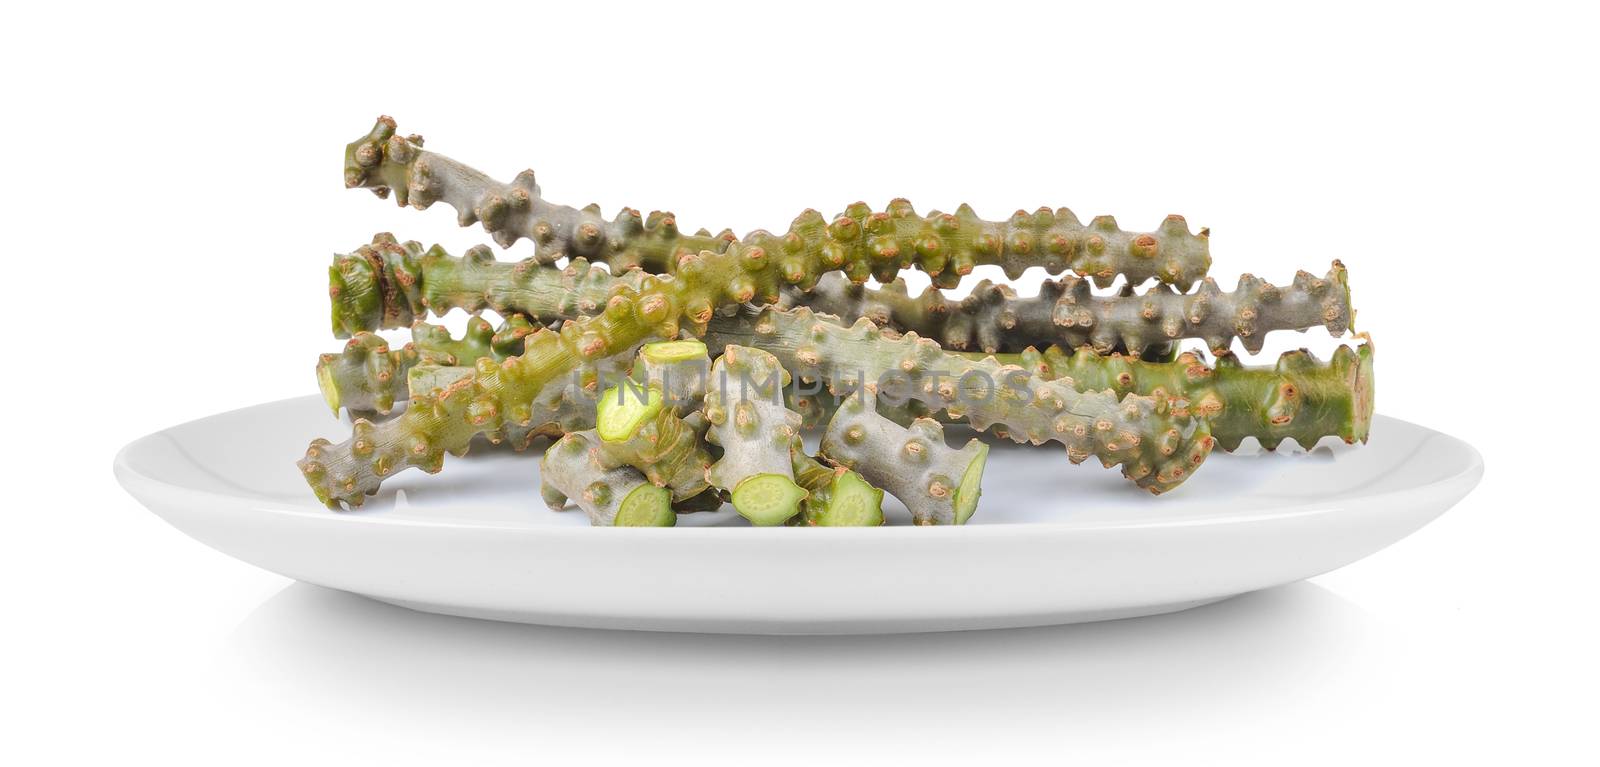 Tinospora cordifolia herb in plate isolated on white background